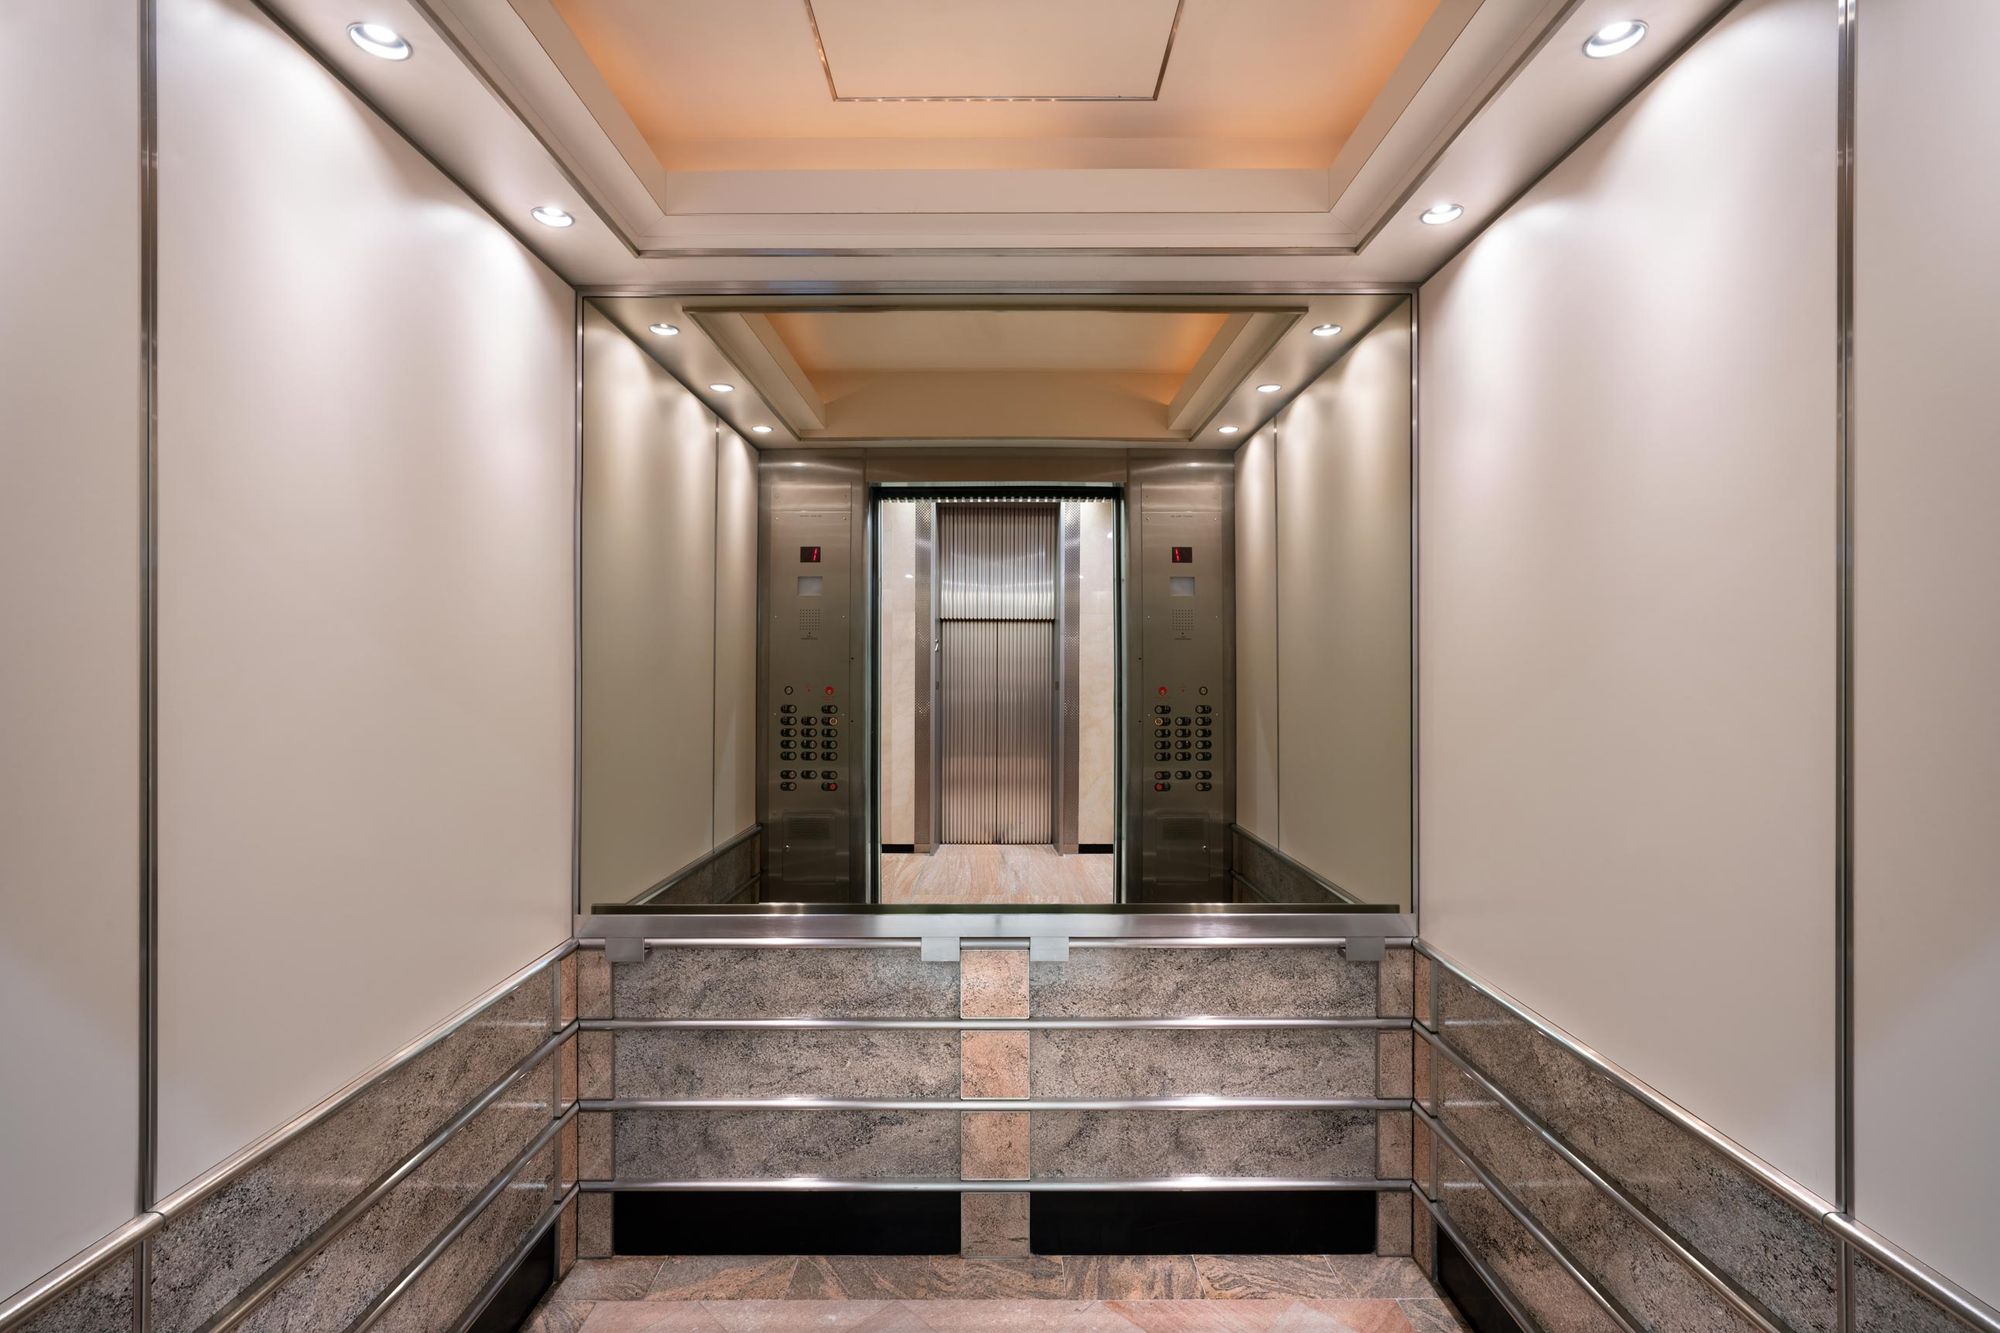 Luxury elevator at the 99 Park Avenue hotel